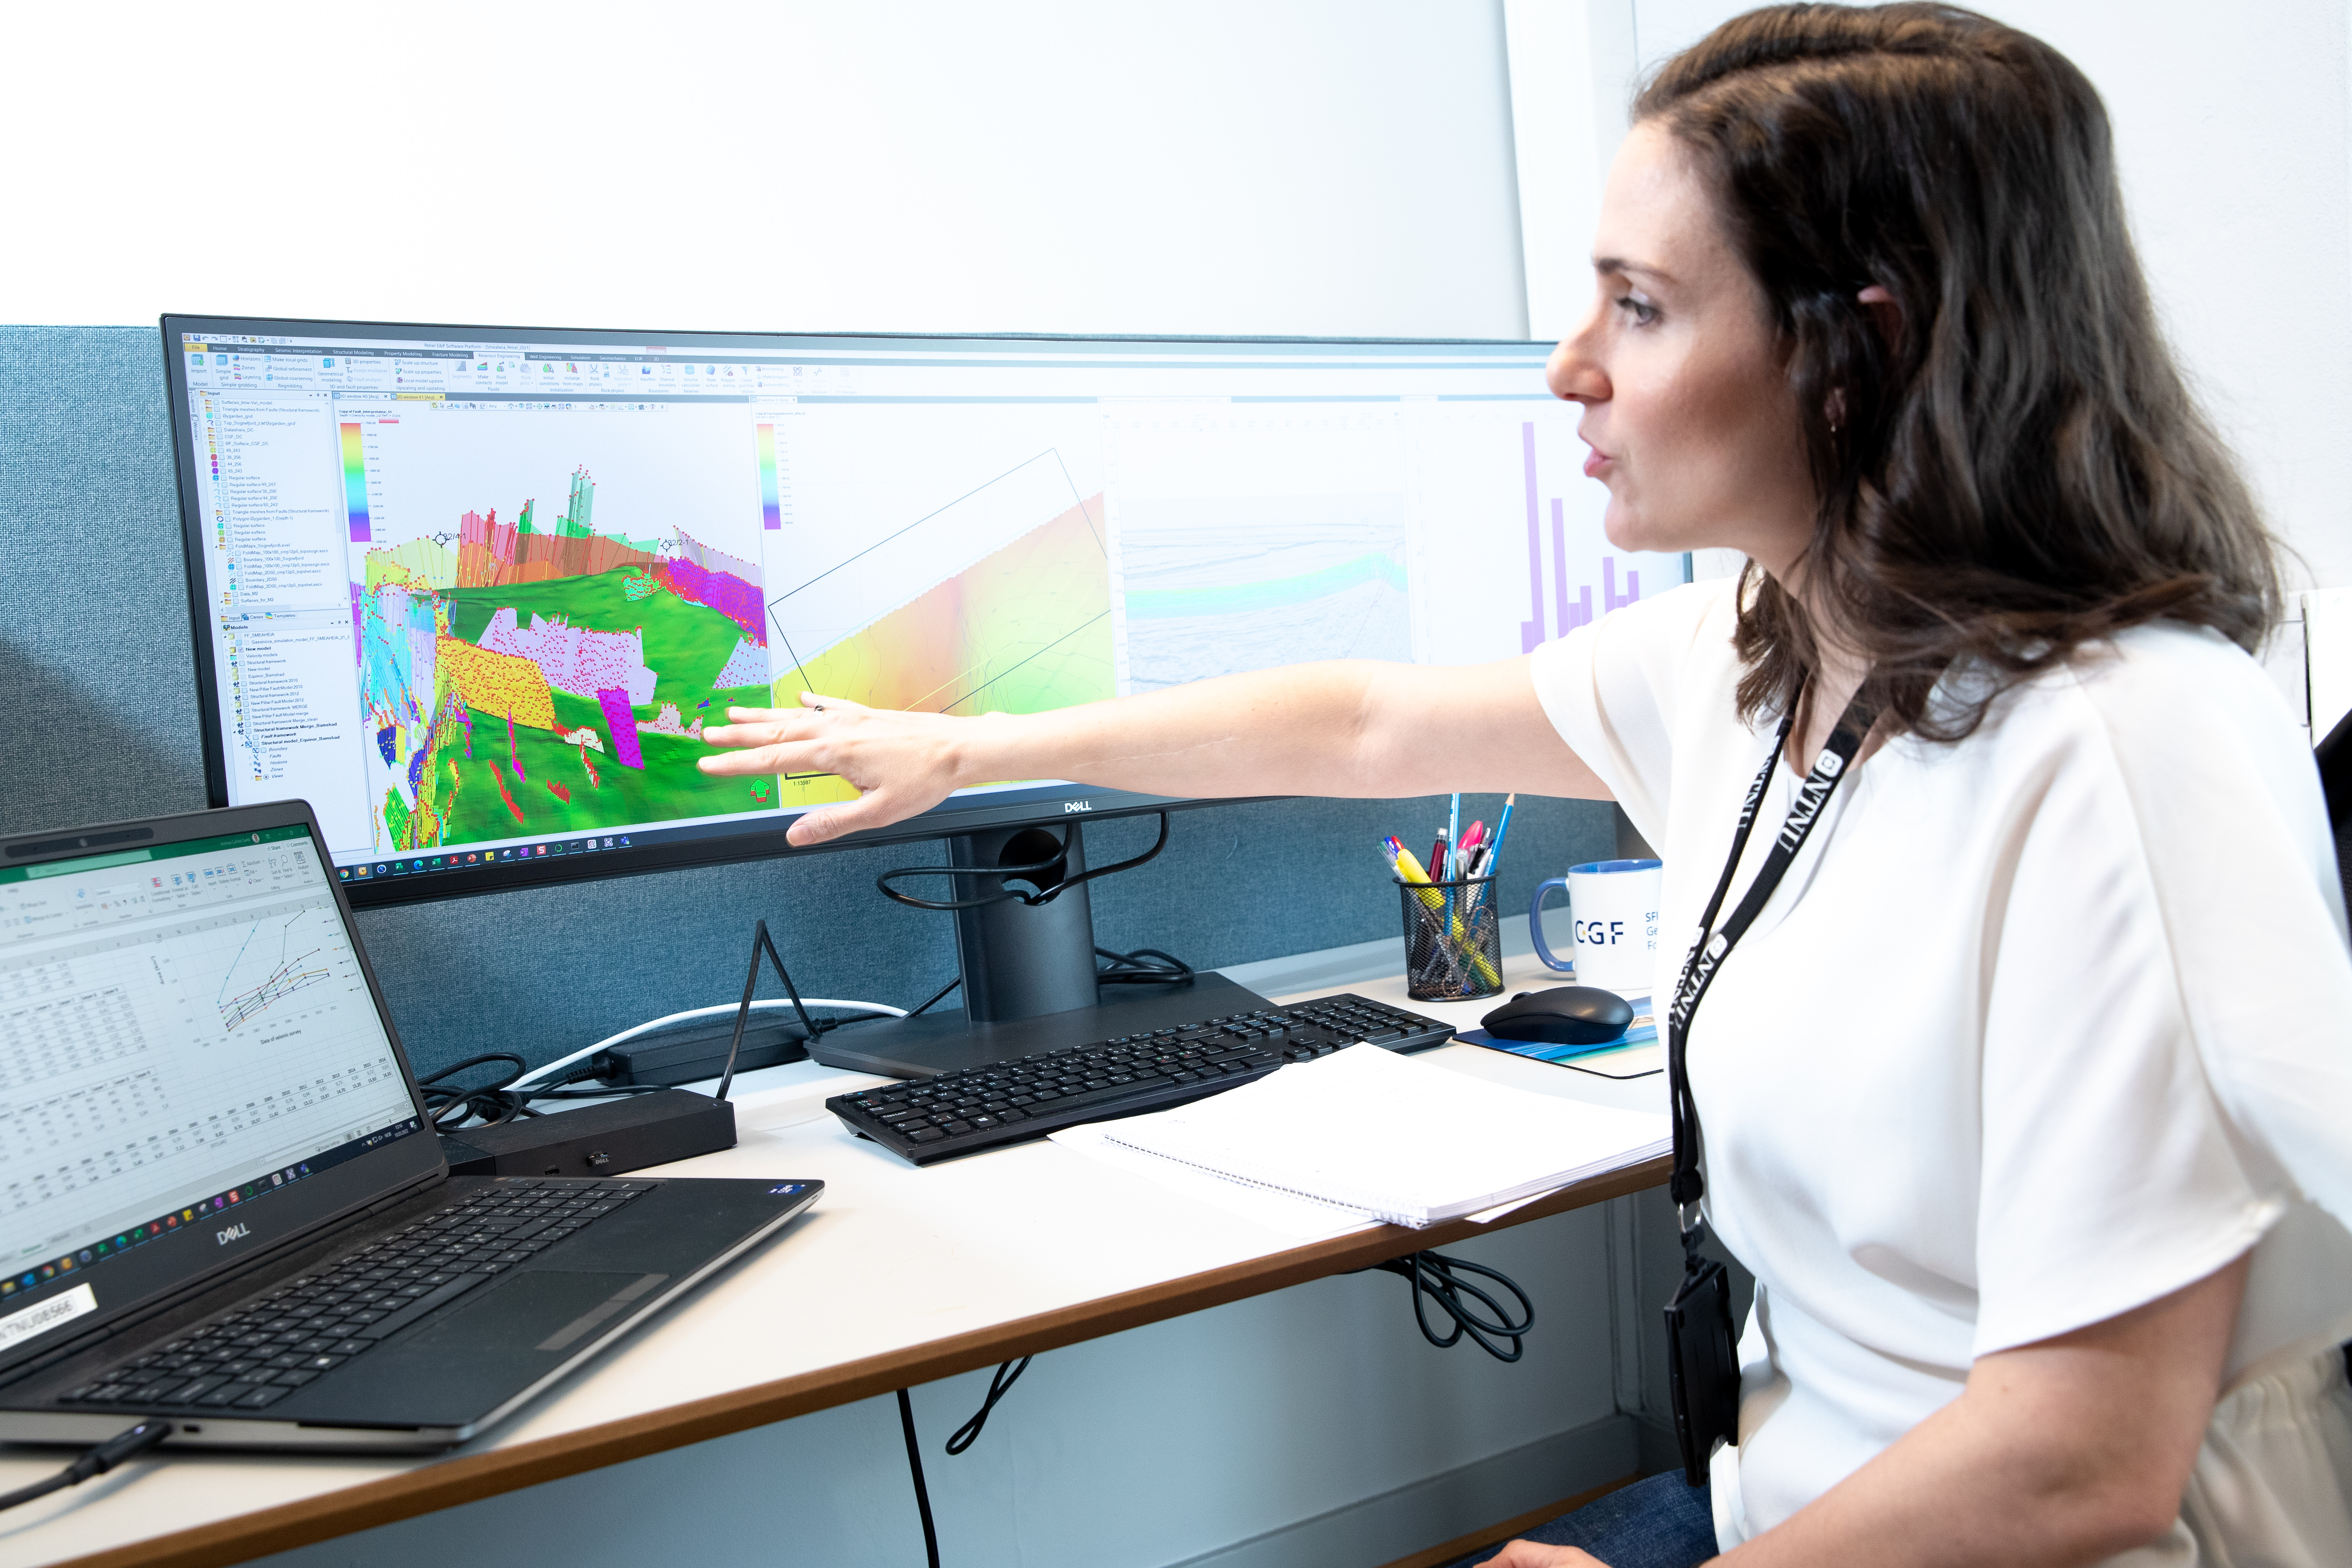 Researcher showing geophysical models on a computer screen. Photo